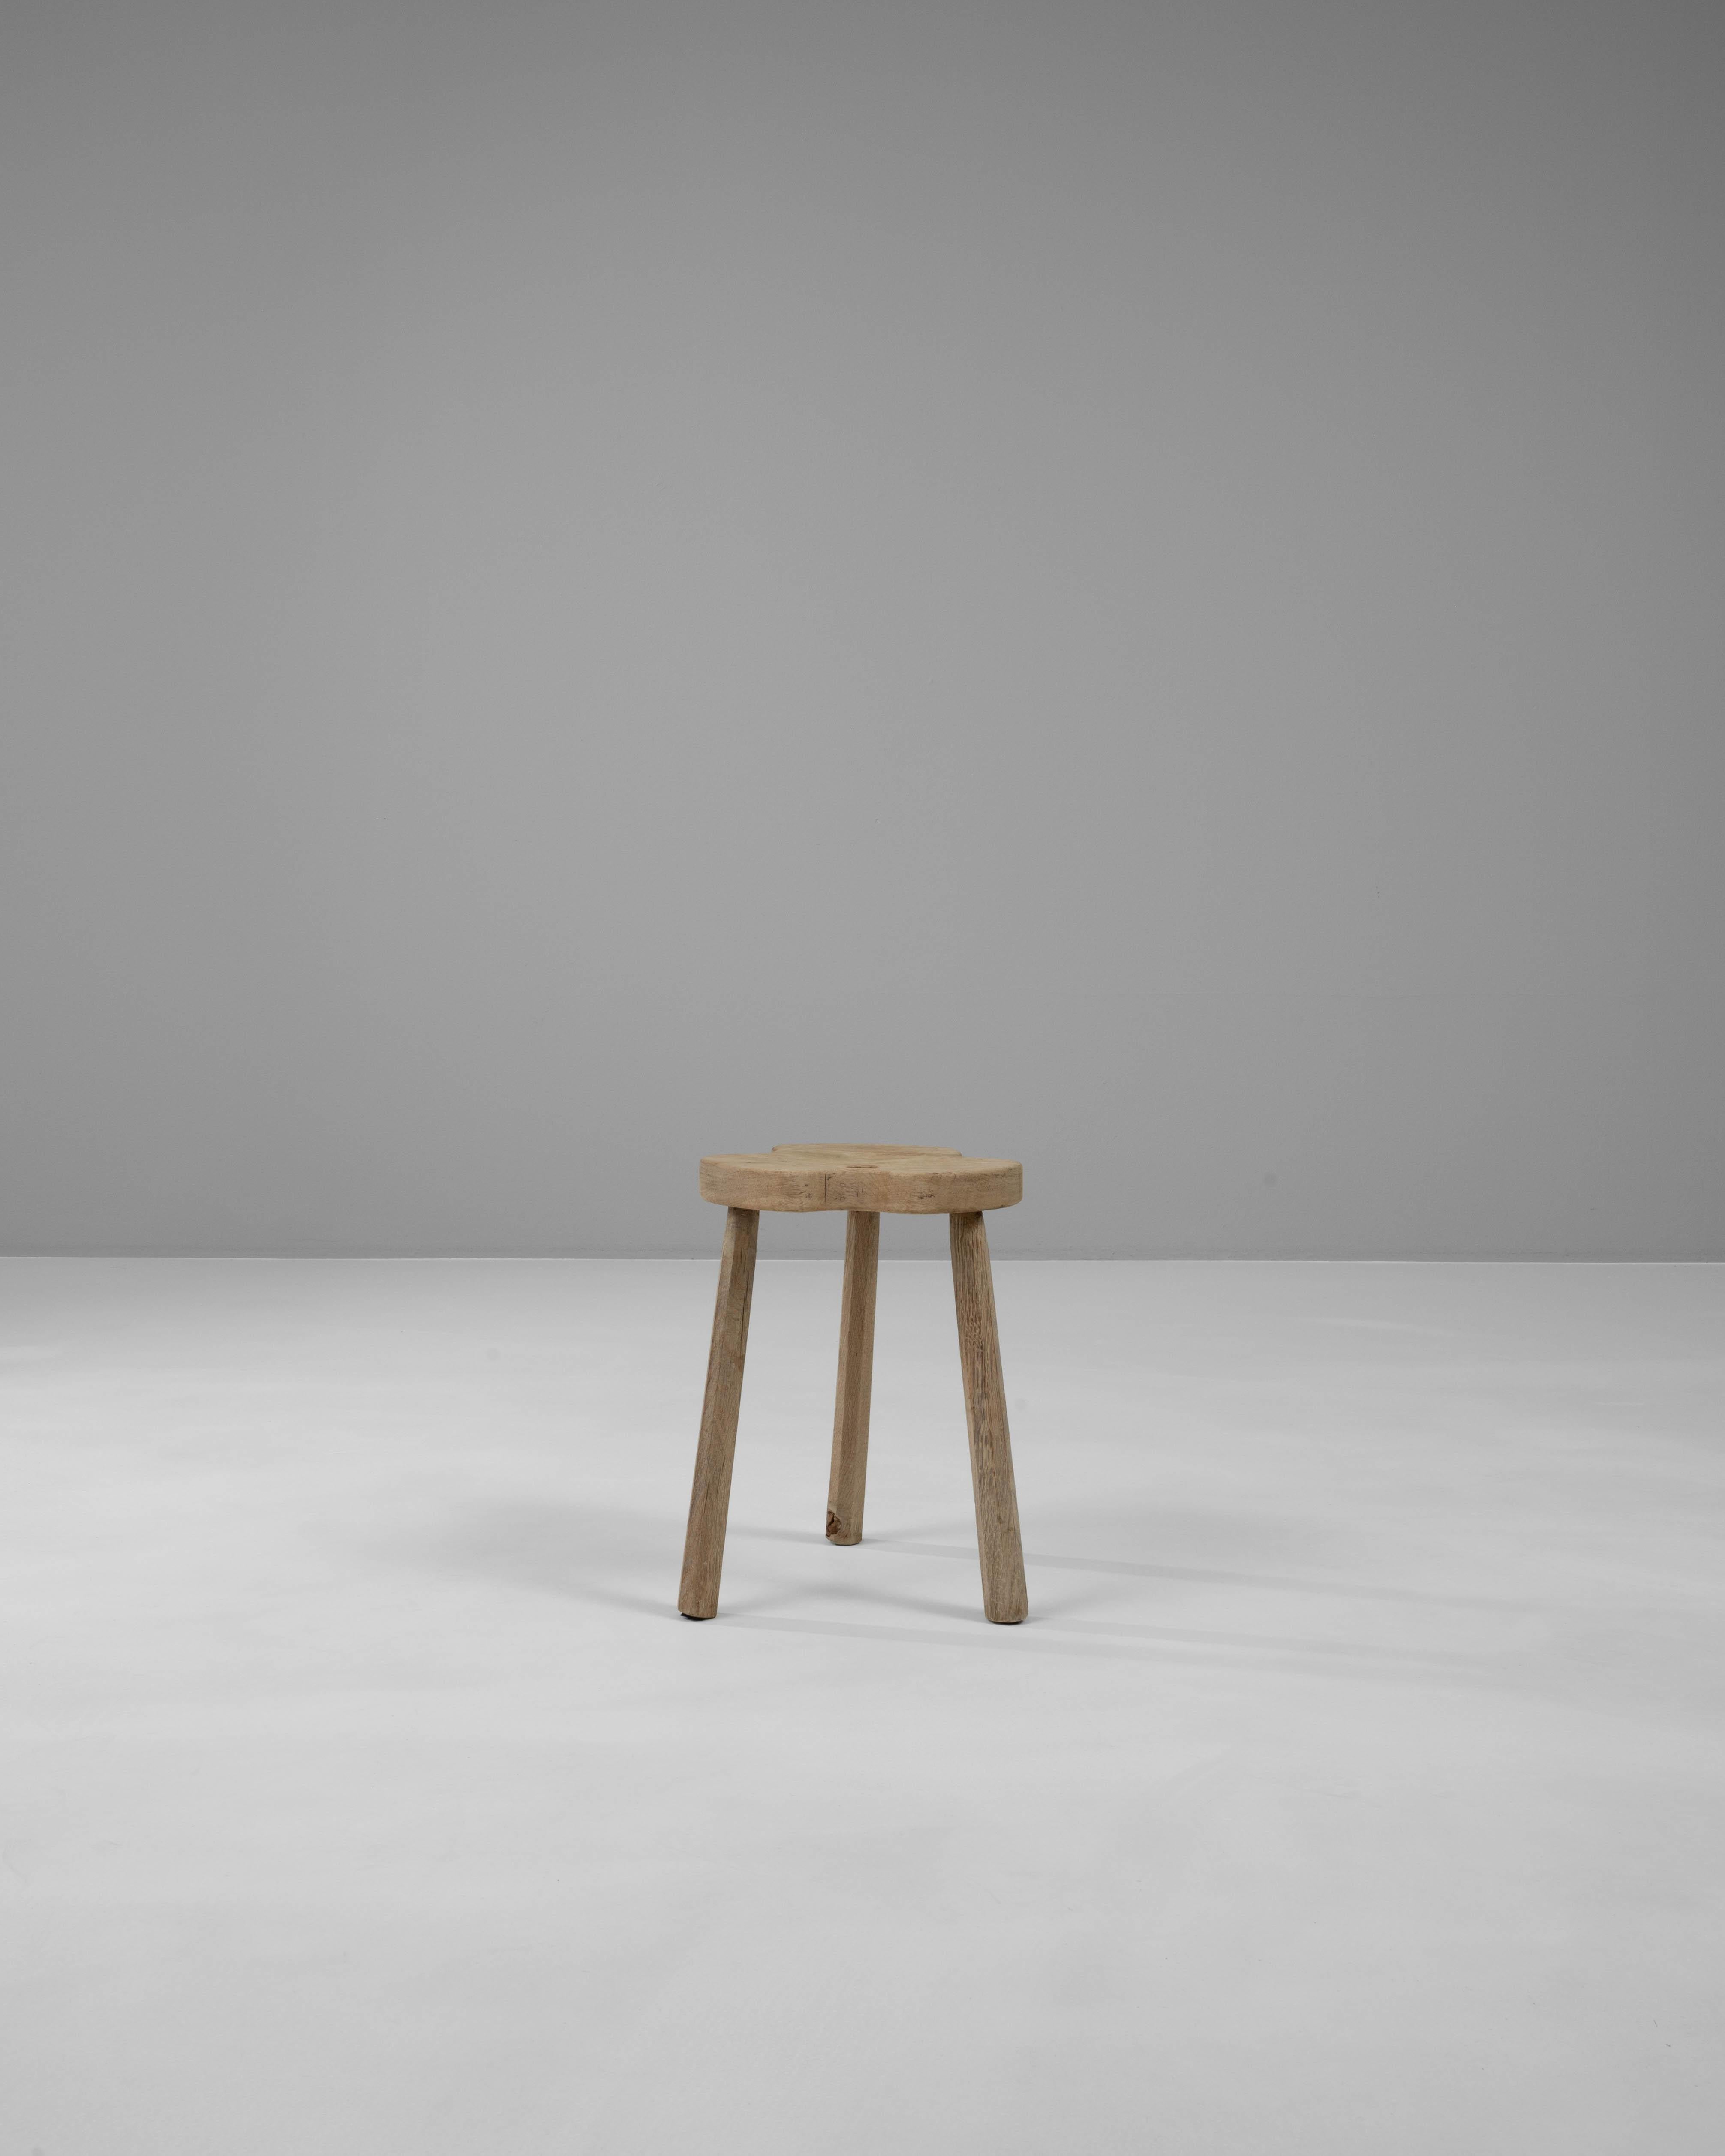 Discover the rustic charm of this 20th Century French Wooden Stool, a blend of minimalist design and utilitarian functionality. Crafted from solid wood, this stool features an organically shaped seat with a distinctive, playful cut-out detail that